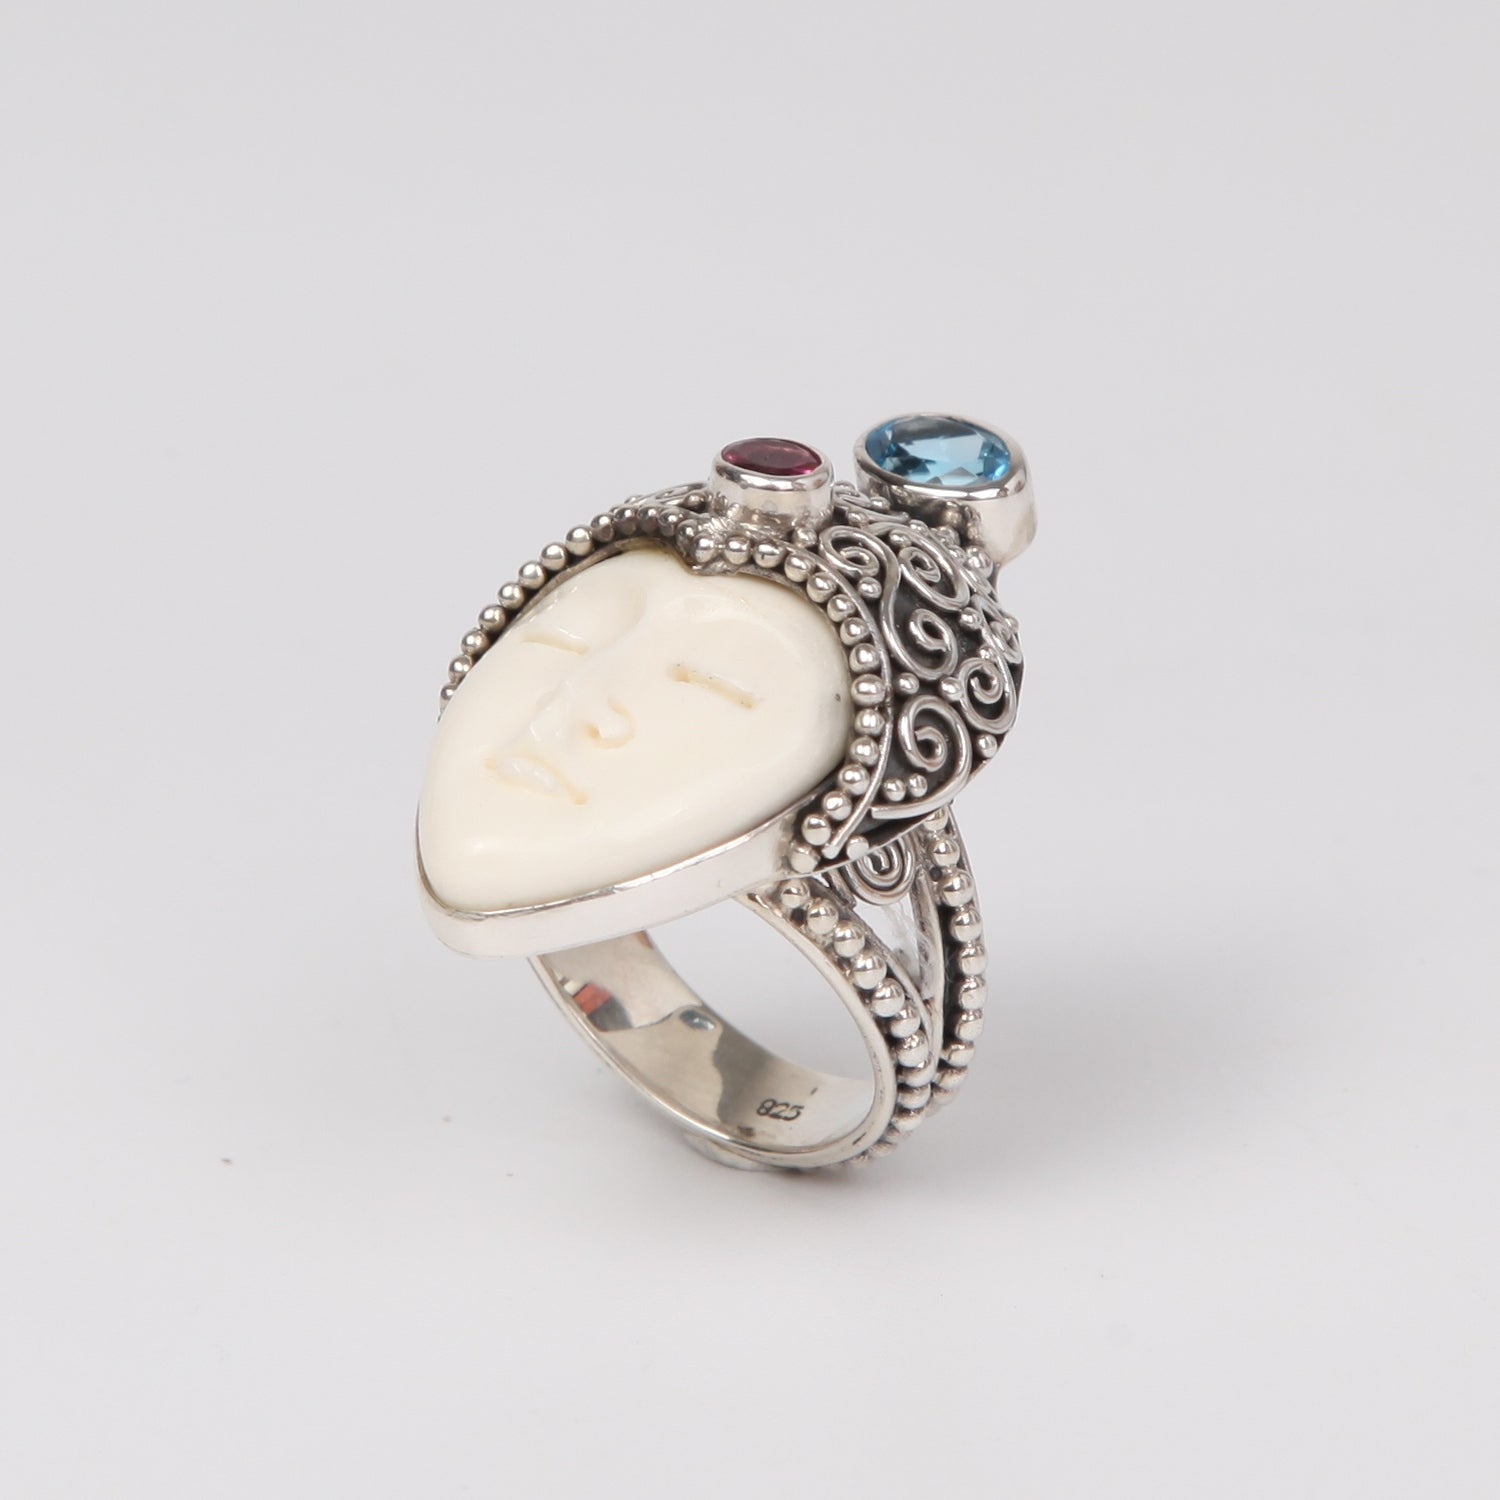 Buffalo Bone( Moon face) Sterling Silver Ring with Blue Topaz and Garnet